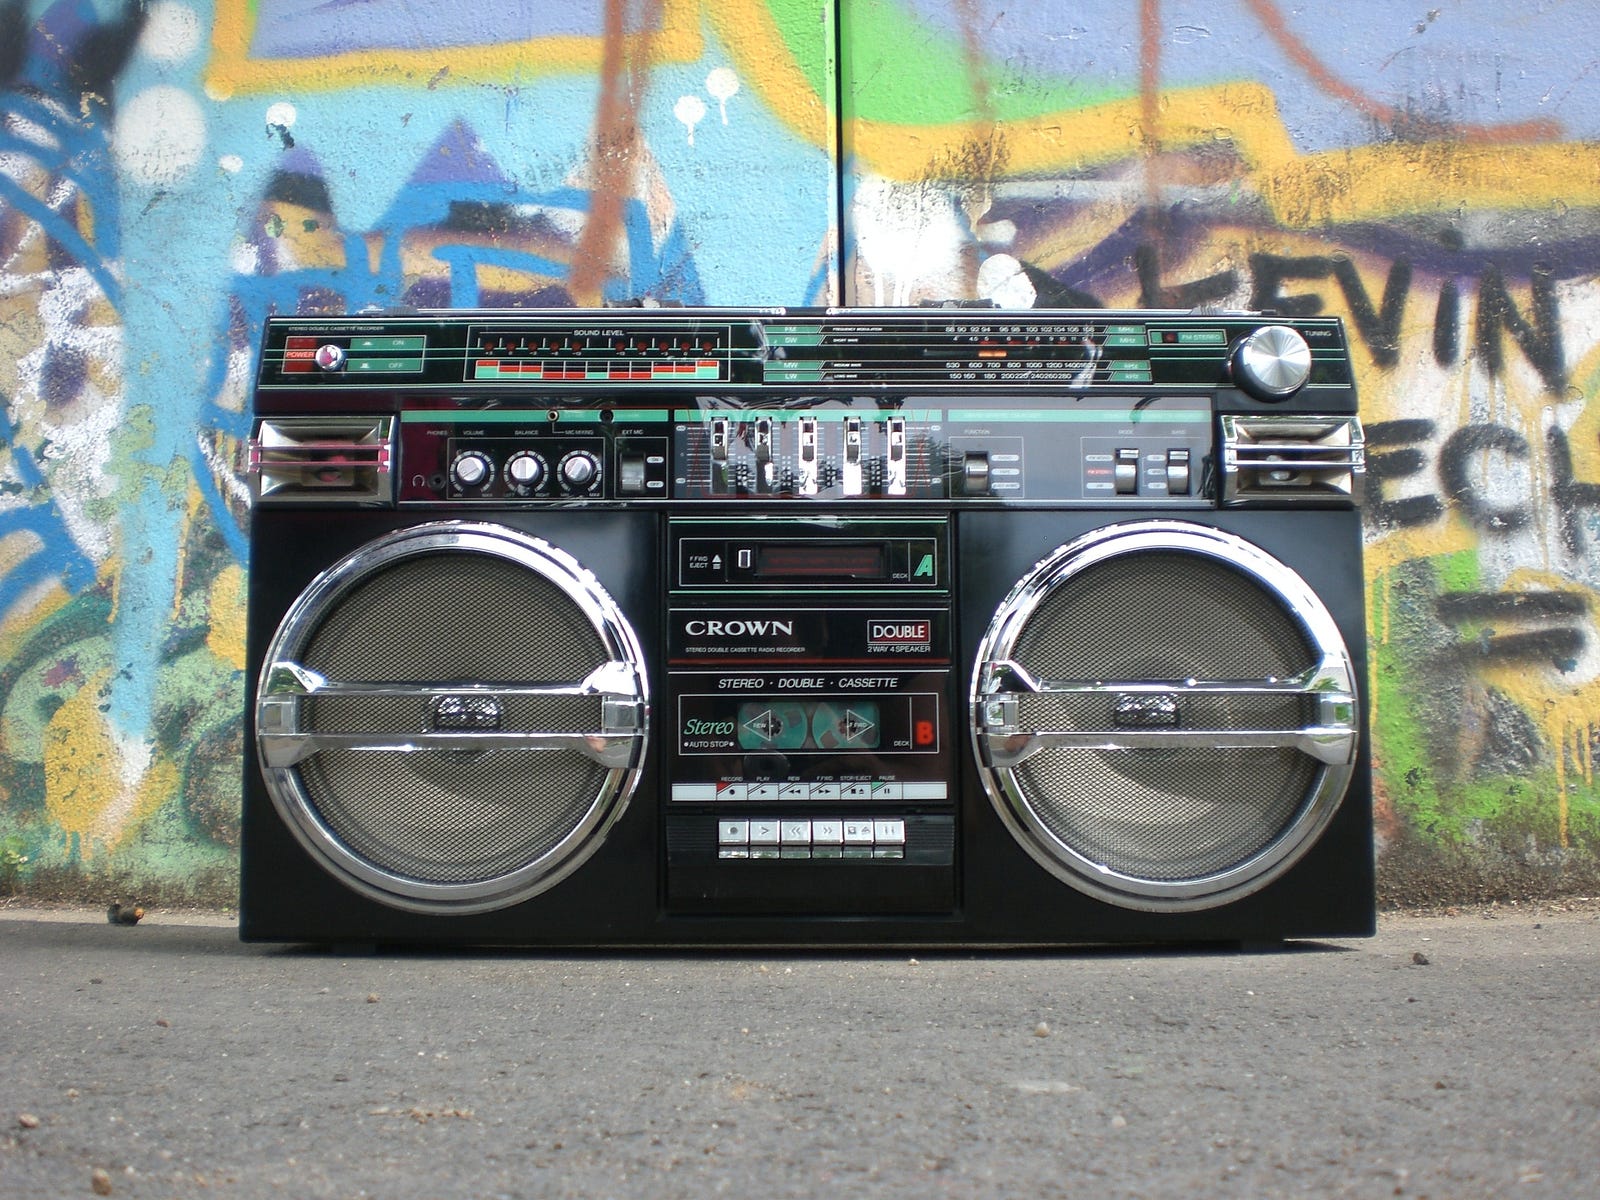 1990s stereo